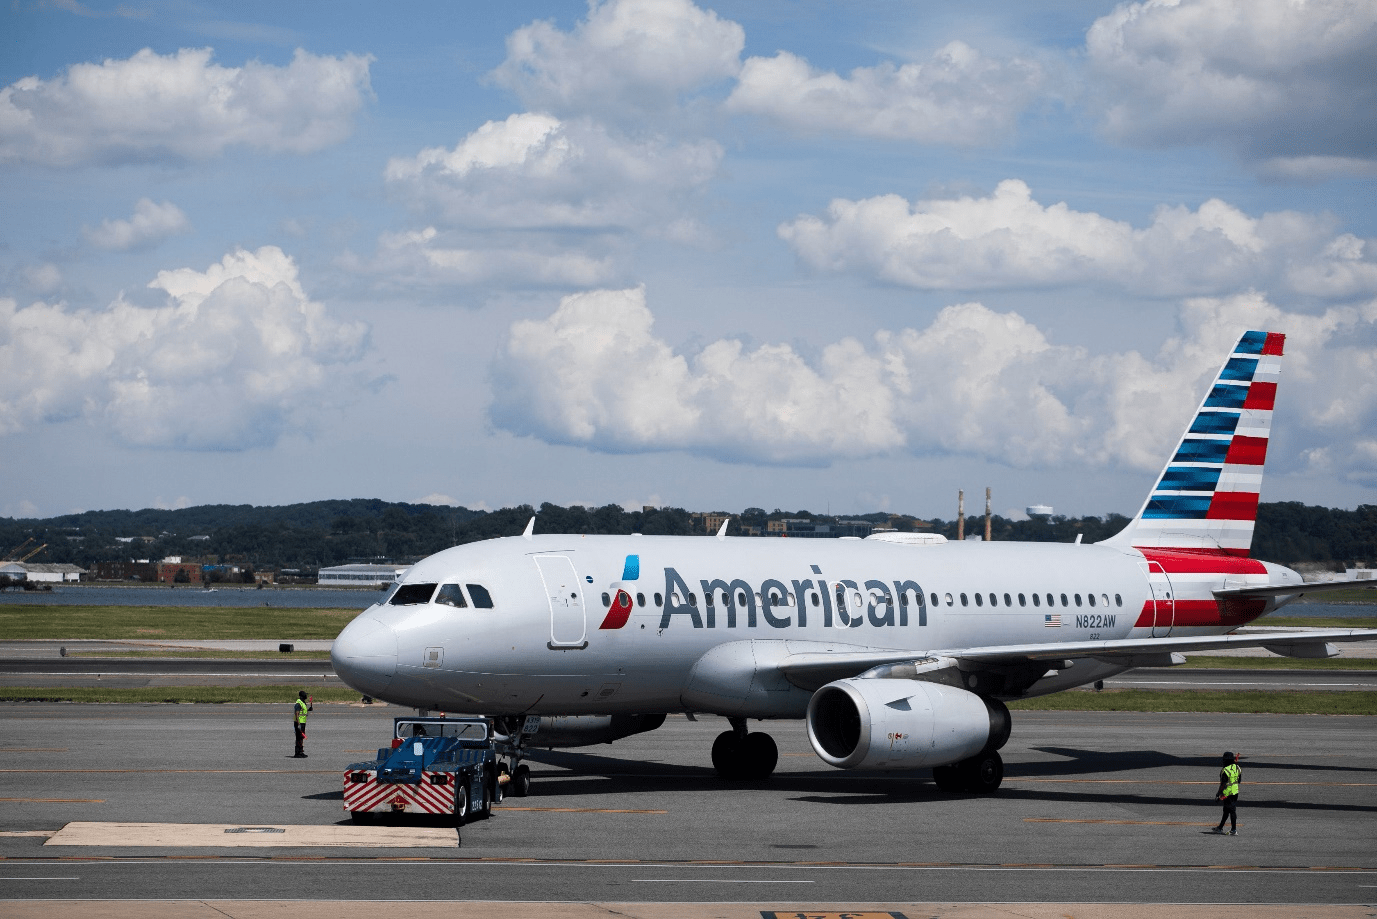 American Airlines canceled hundreds of flights